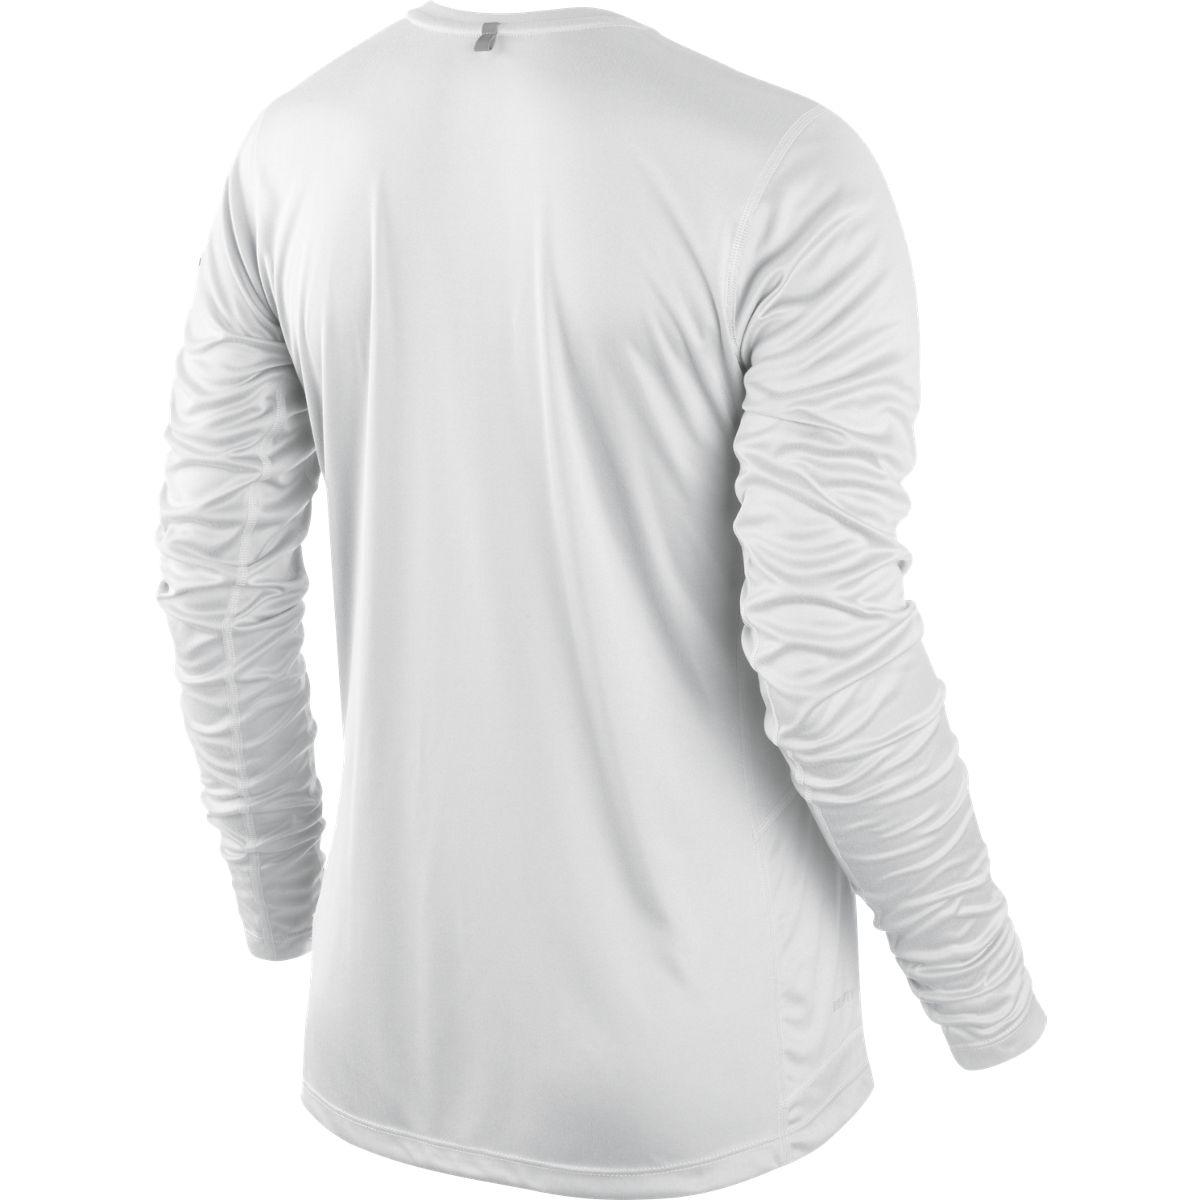 Nike Womens Miler Long Sleeve Running Top - White/Reflective Silver ...